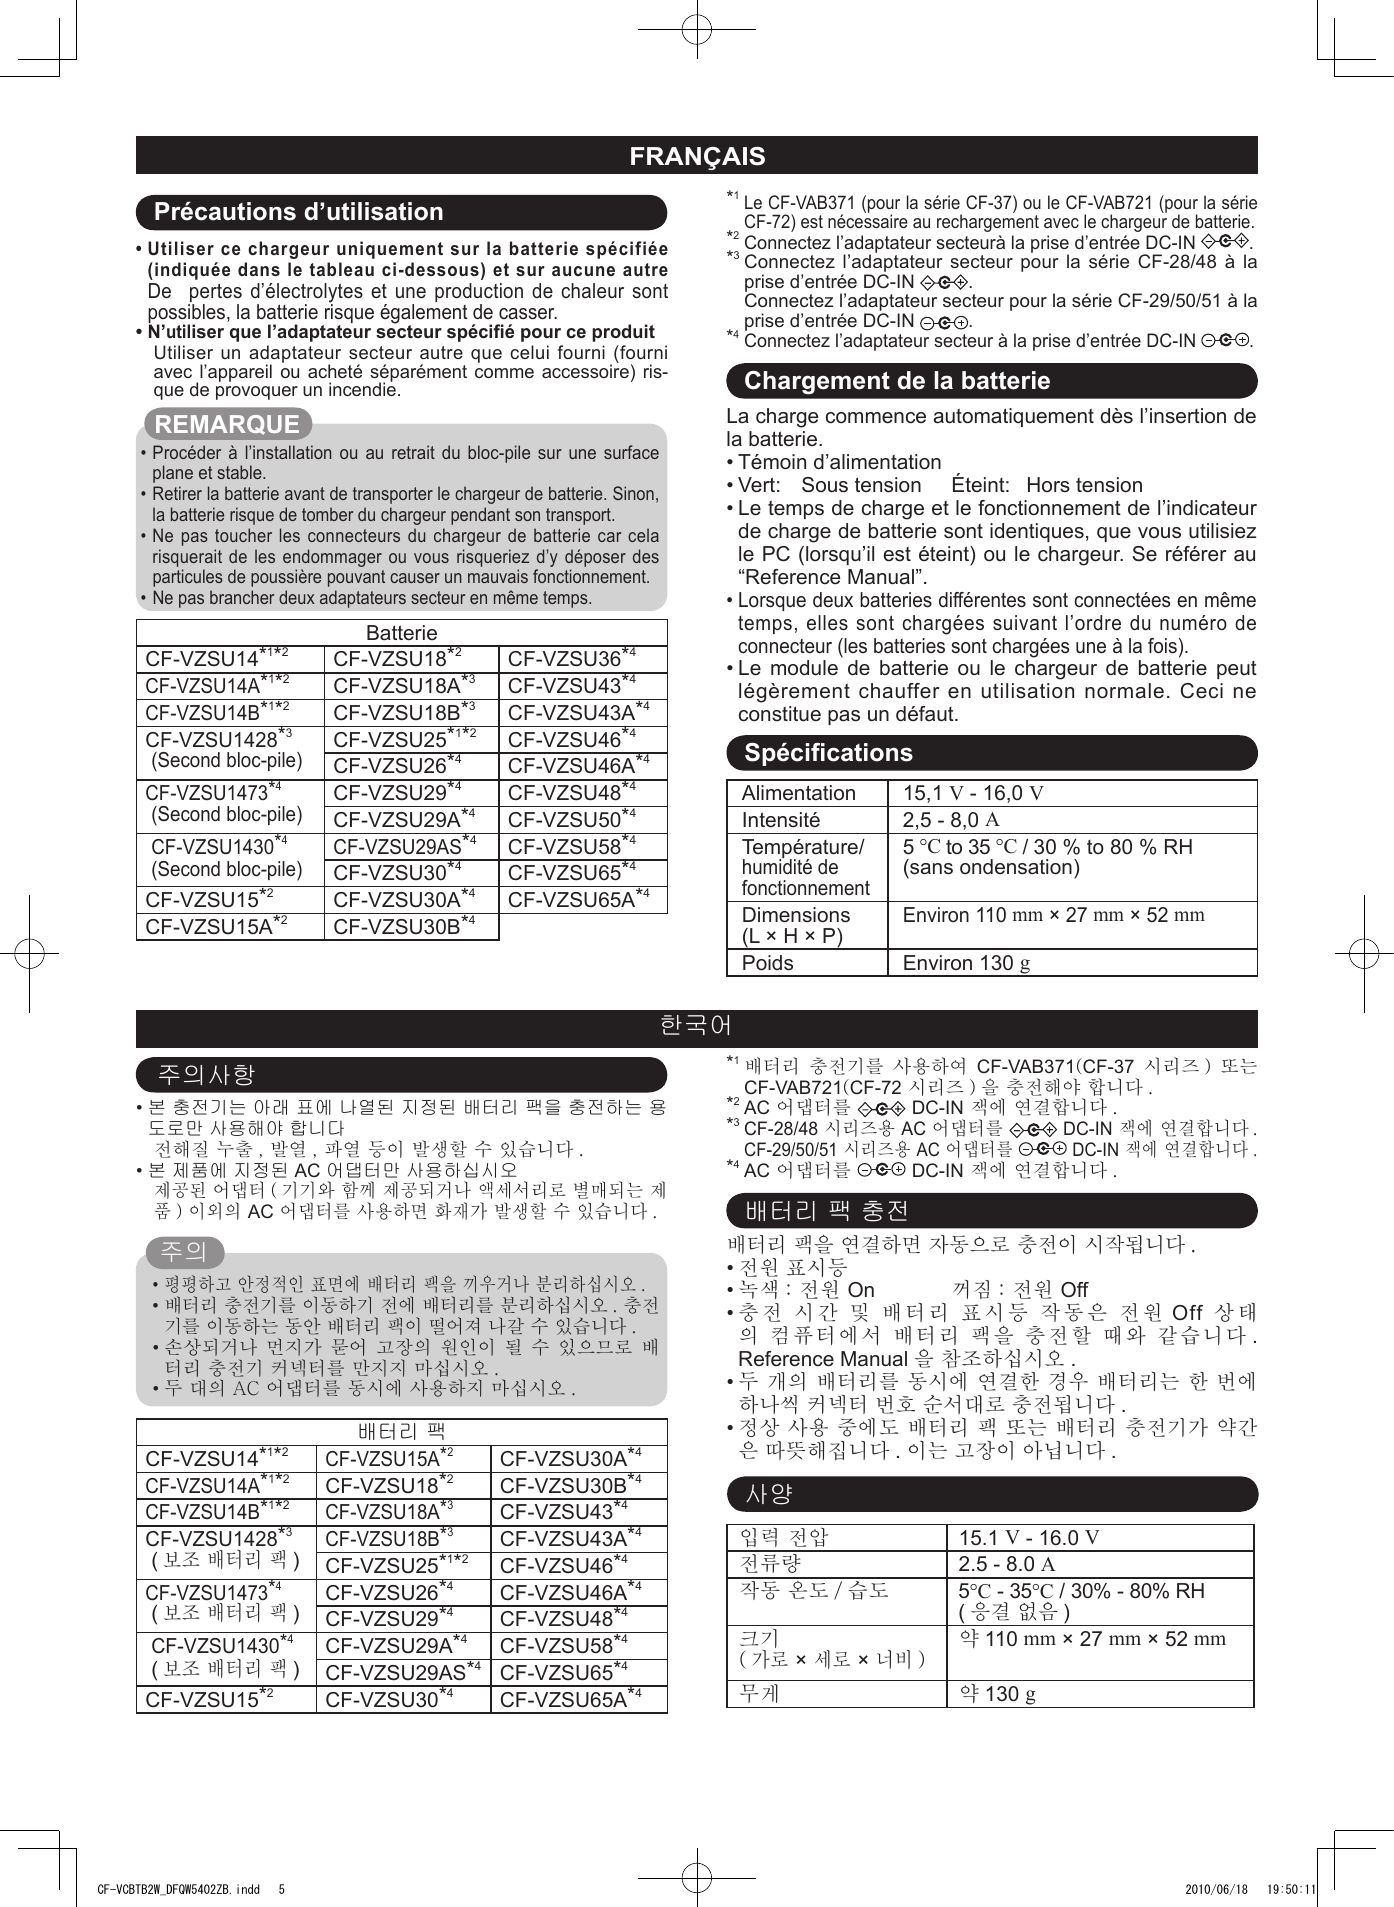 Page 4 of 8 - Panasonic CF-VCBxxx (Battery Charger) Operating Instructions User Manual : (English/ German/ French/ Korean/ Japanese) (Revision) Vcbtb2w-oi-dfqw5402ya-non-nonlogo-JMGFKO-p20110780